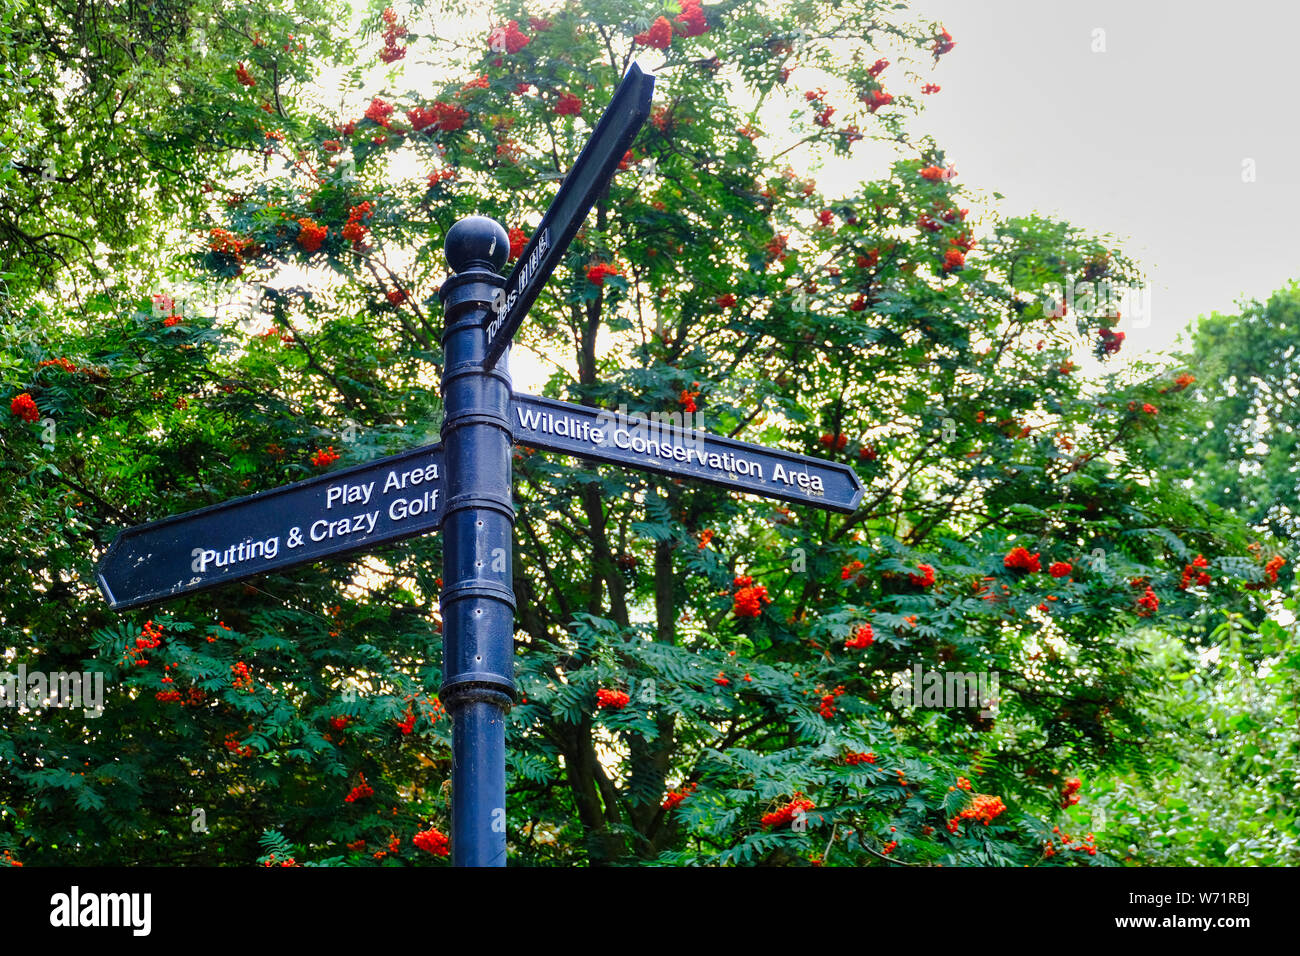 Hotham Park, Bognor Regis, W Sussex, UK. Park signpost pointing the way to play areas and a Wildlife Conservation Area.Rowan Tree (Sorbus aucuparia) Stock Photo